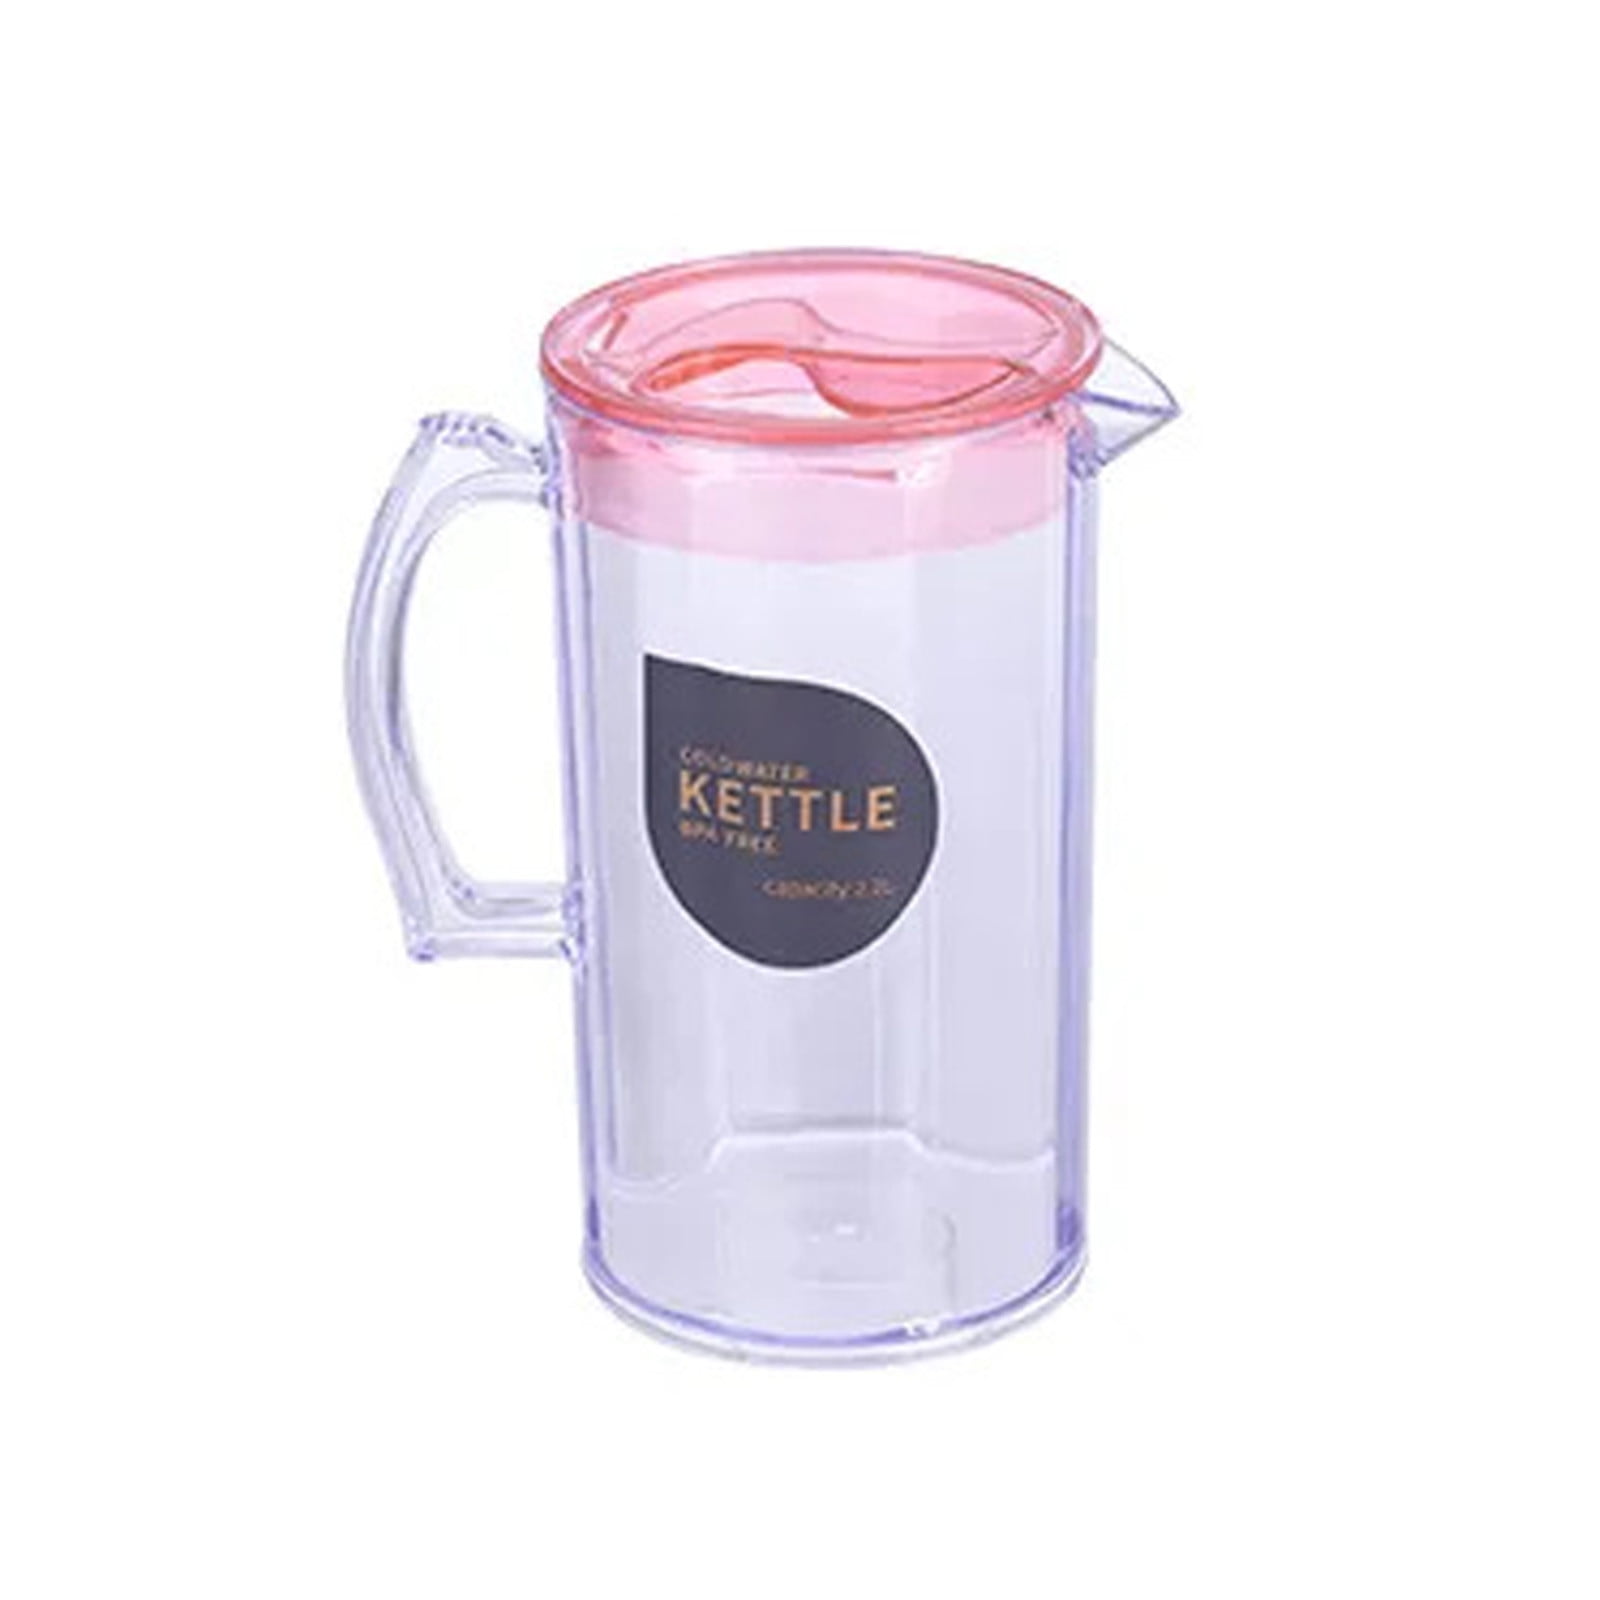 AURIGATE Water Pitcher (0.58 Gallons), Unbreakable Plastic Pitcher